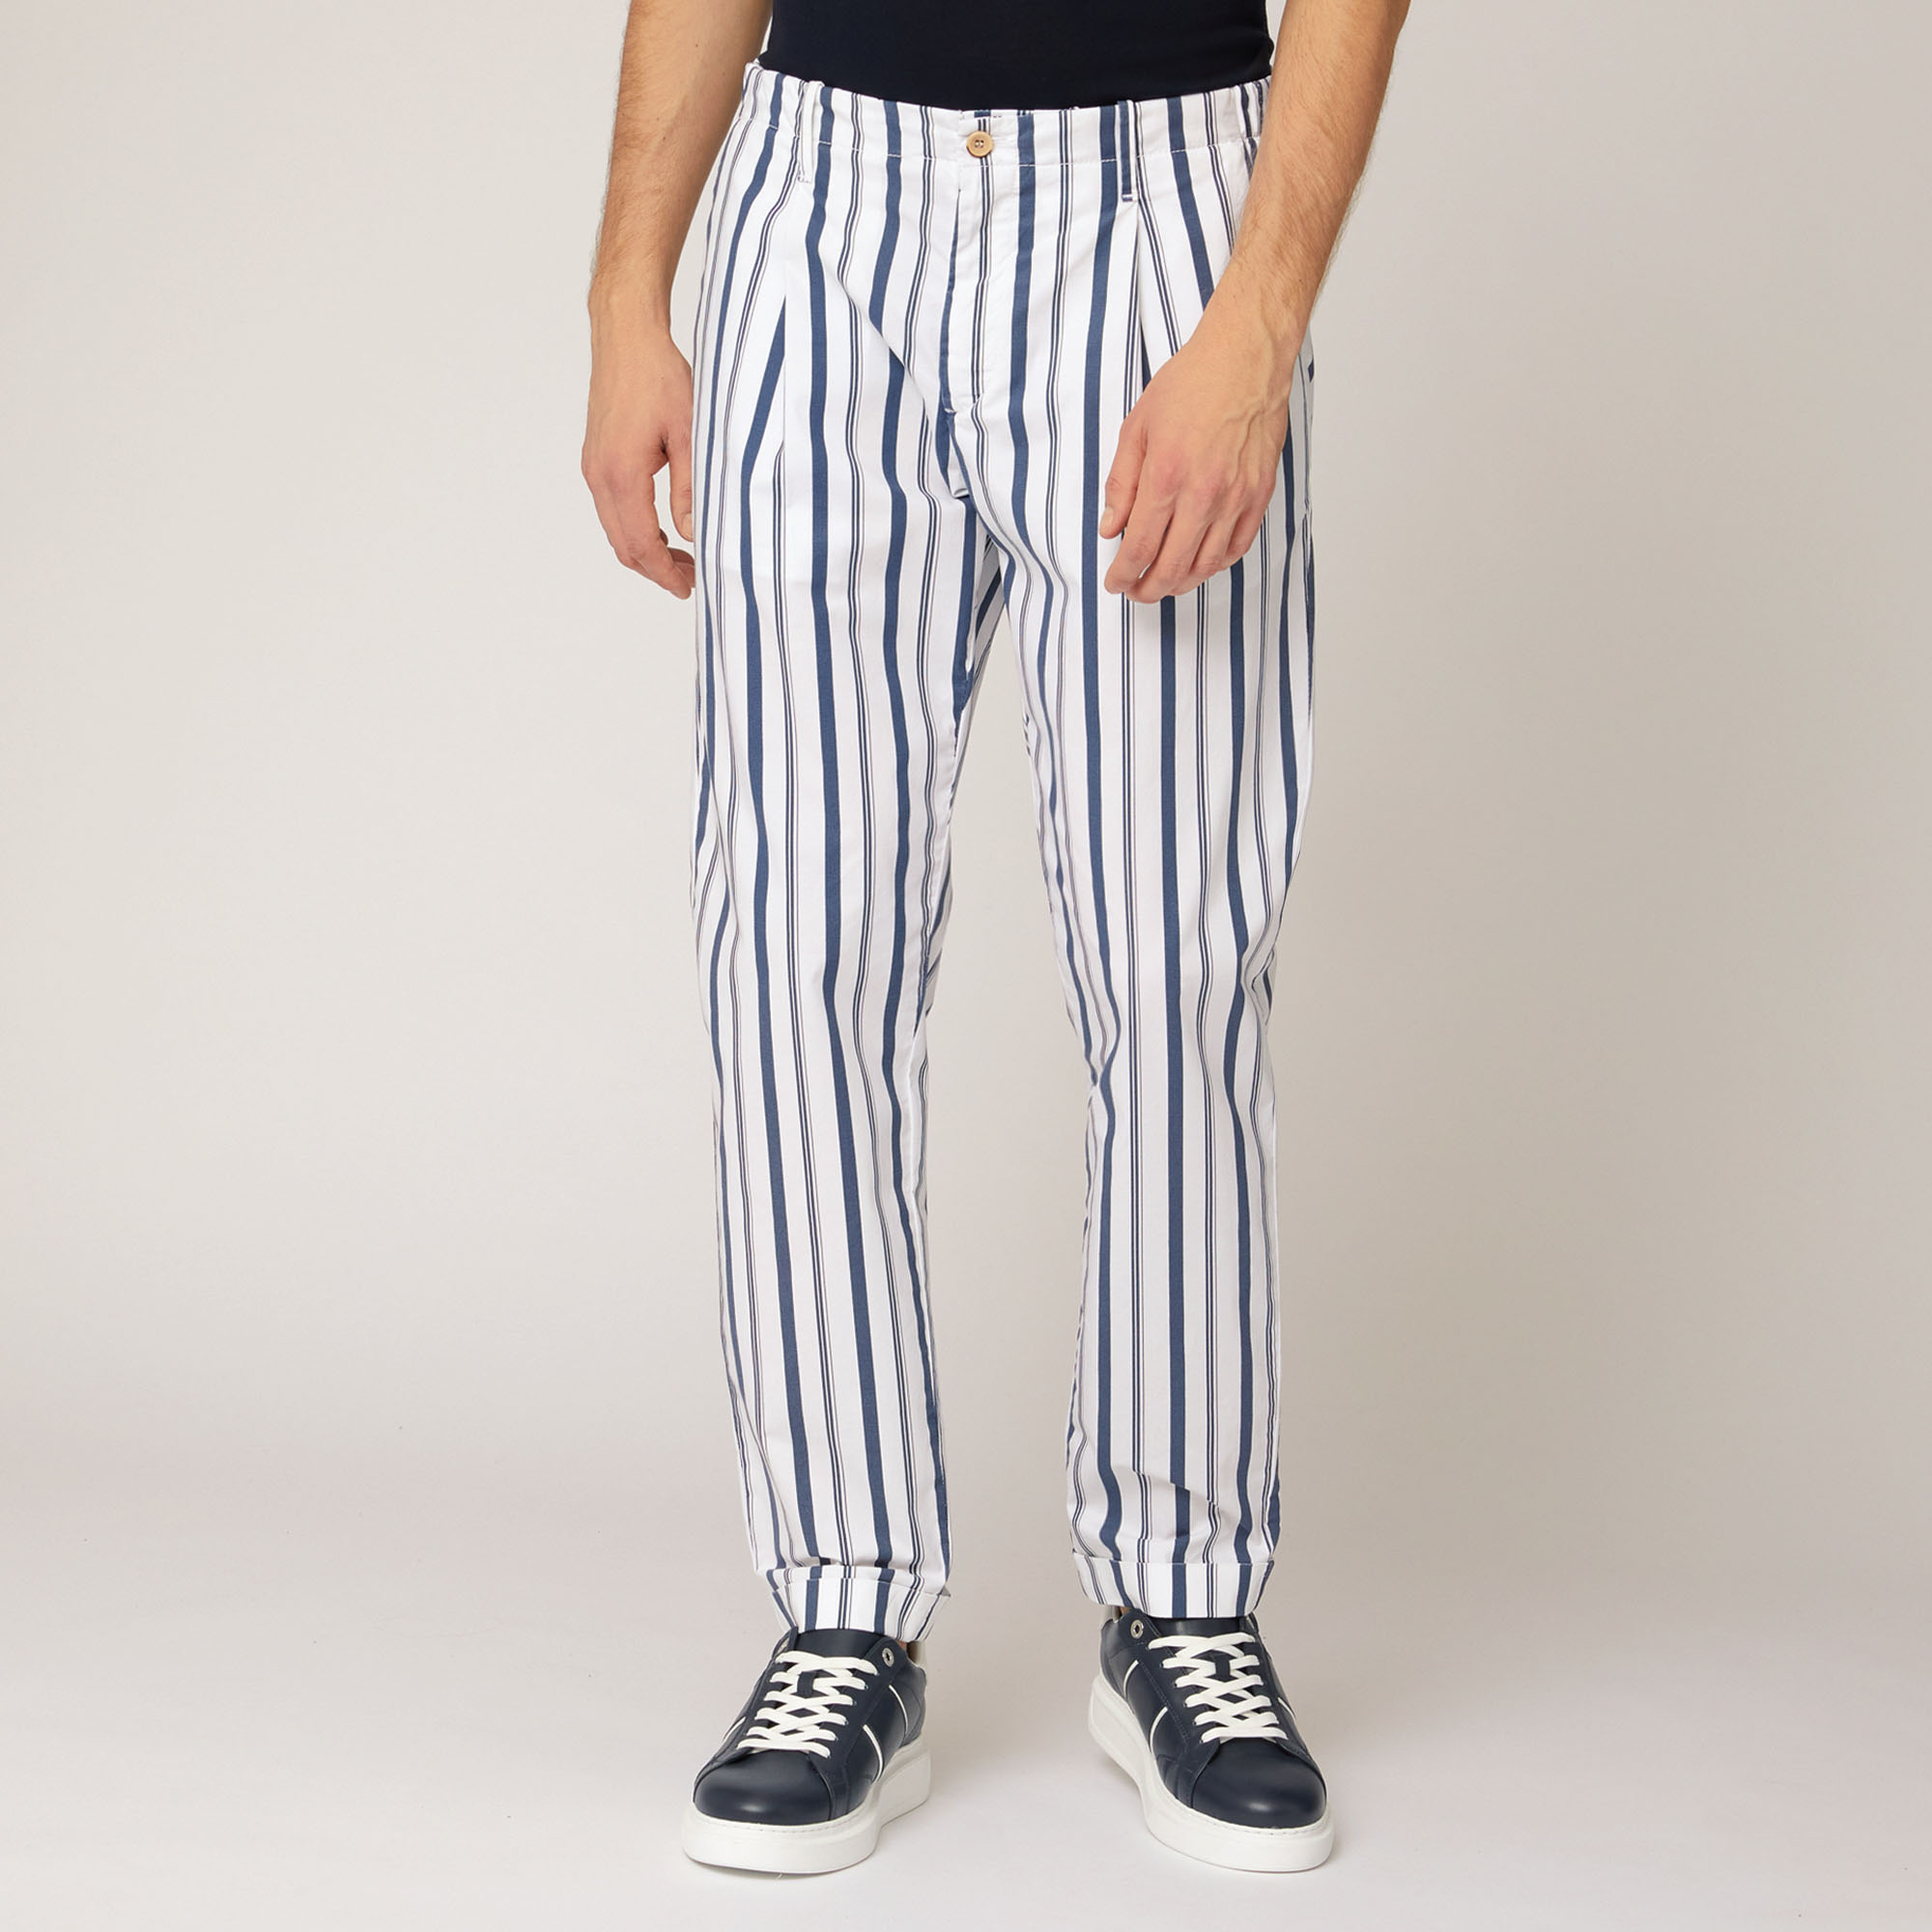 Striped Chino Pants, White, large image number 0